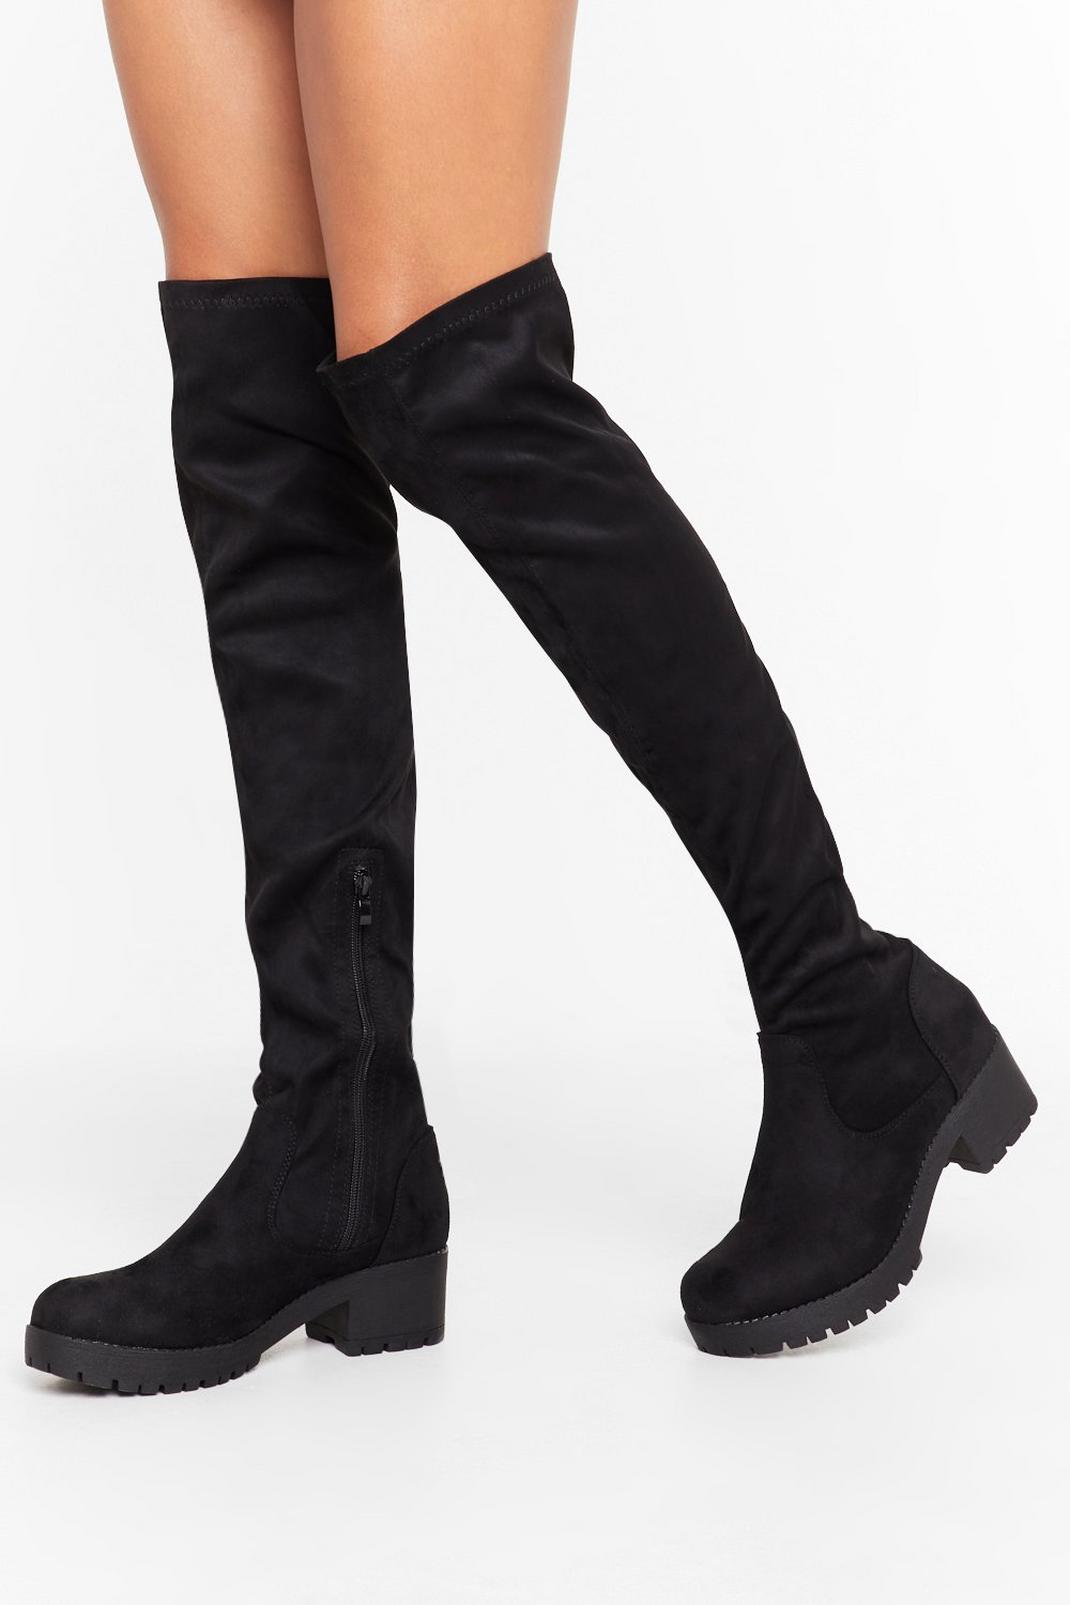 Tell Me When It's Over-the-Knee Faux Suede Boots image number 1